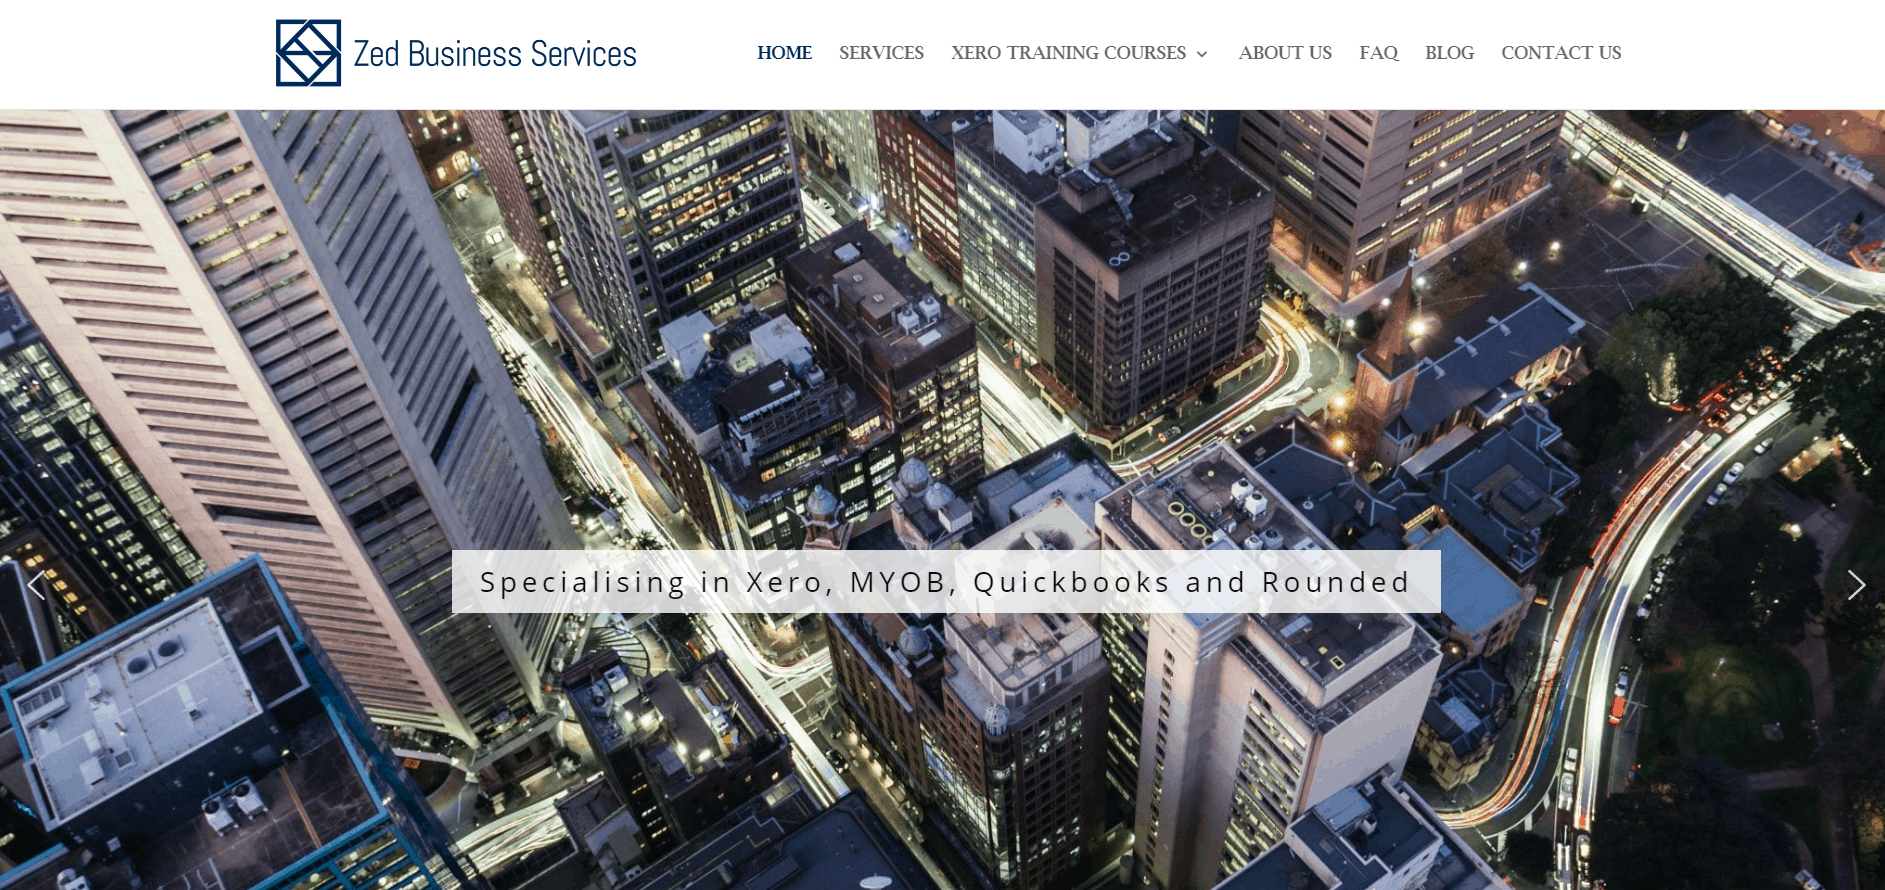 Zed Business Services